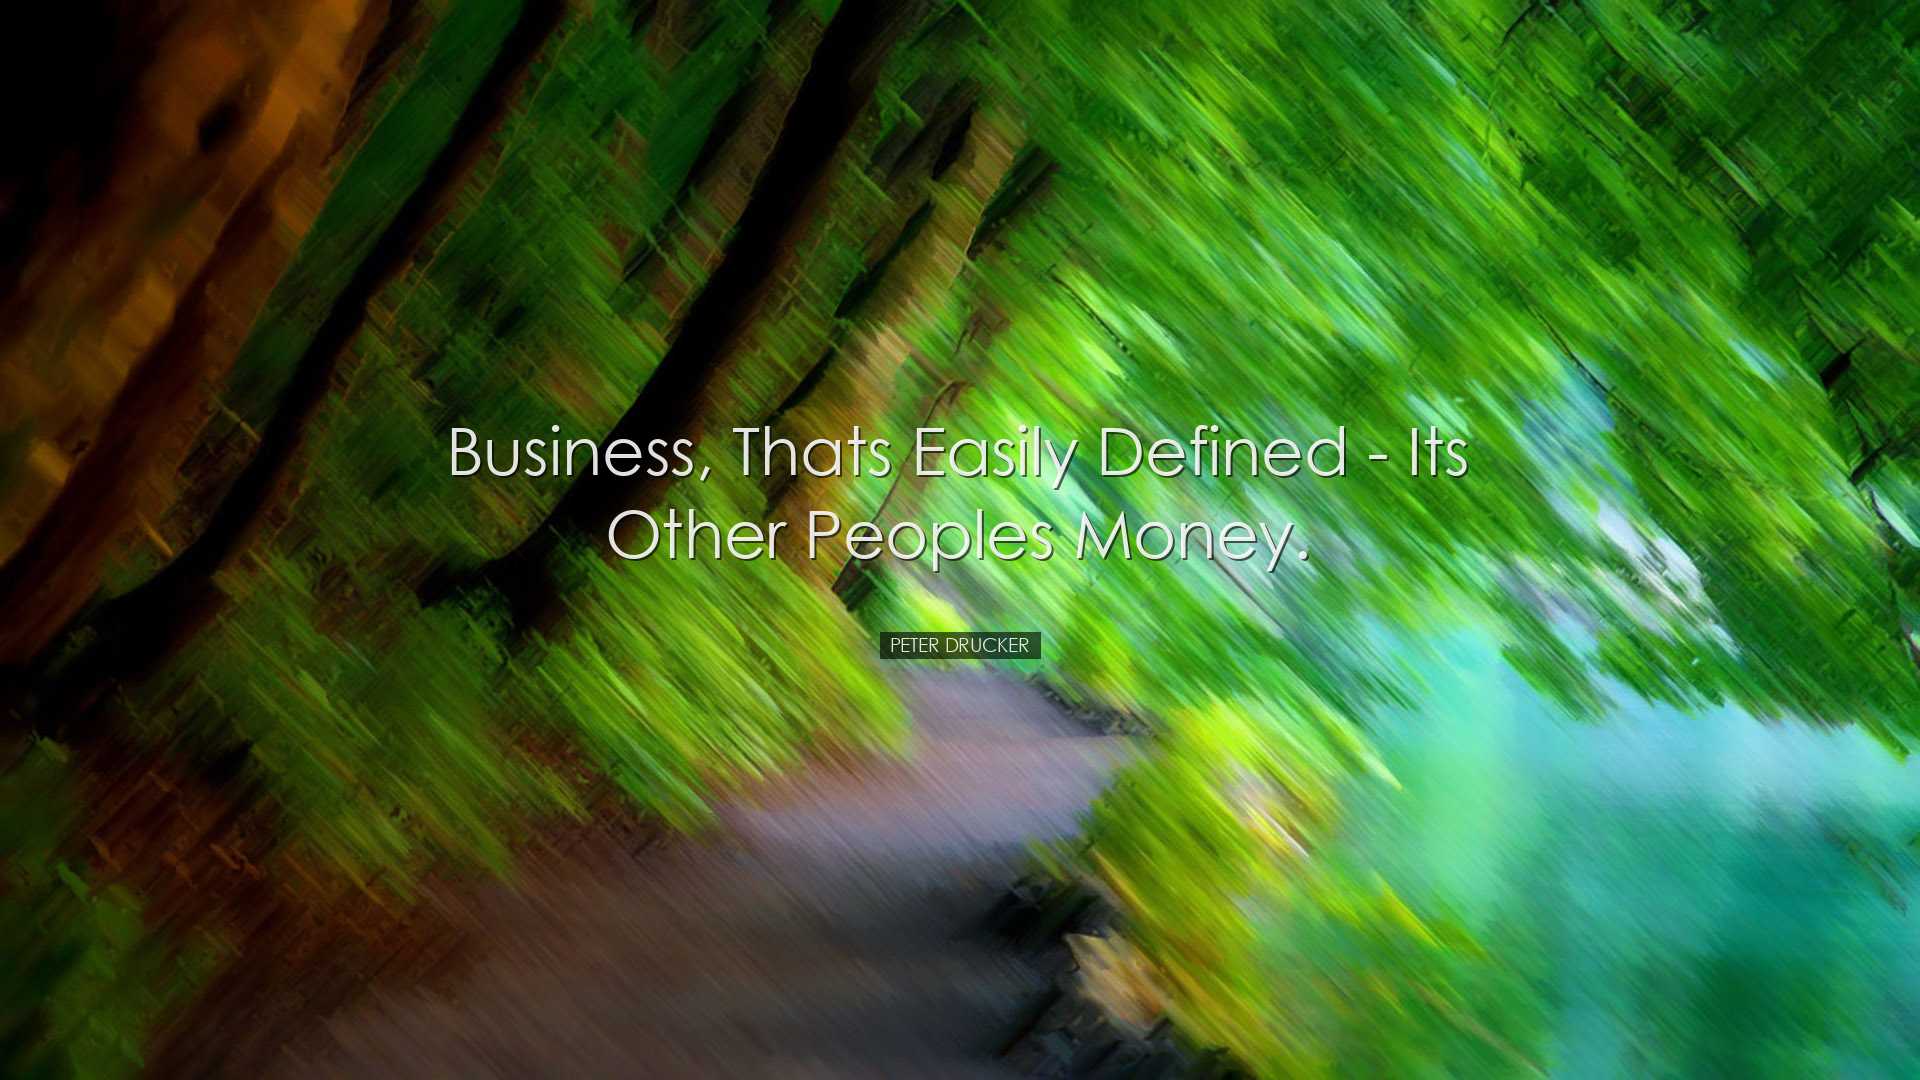 Business, thats easily defined - its other peoples money. - Peter